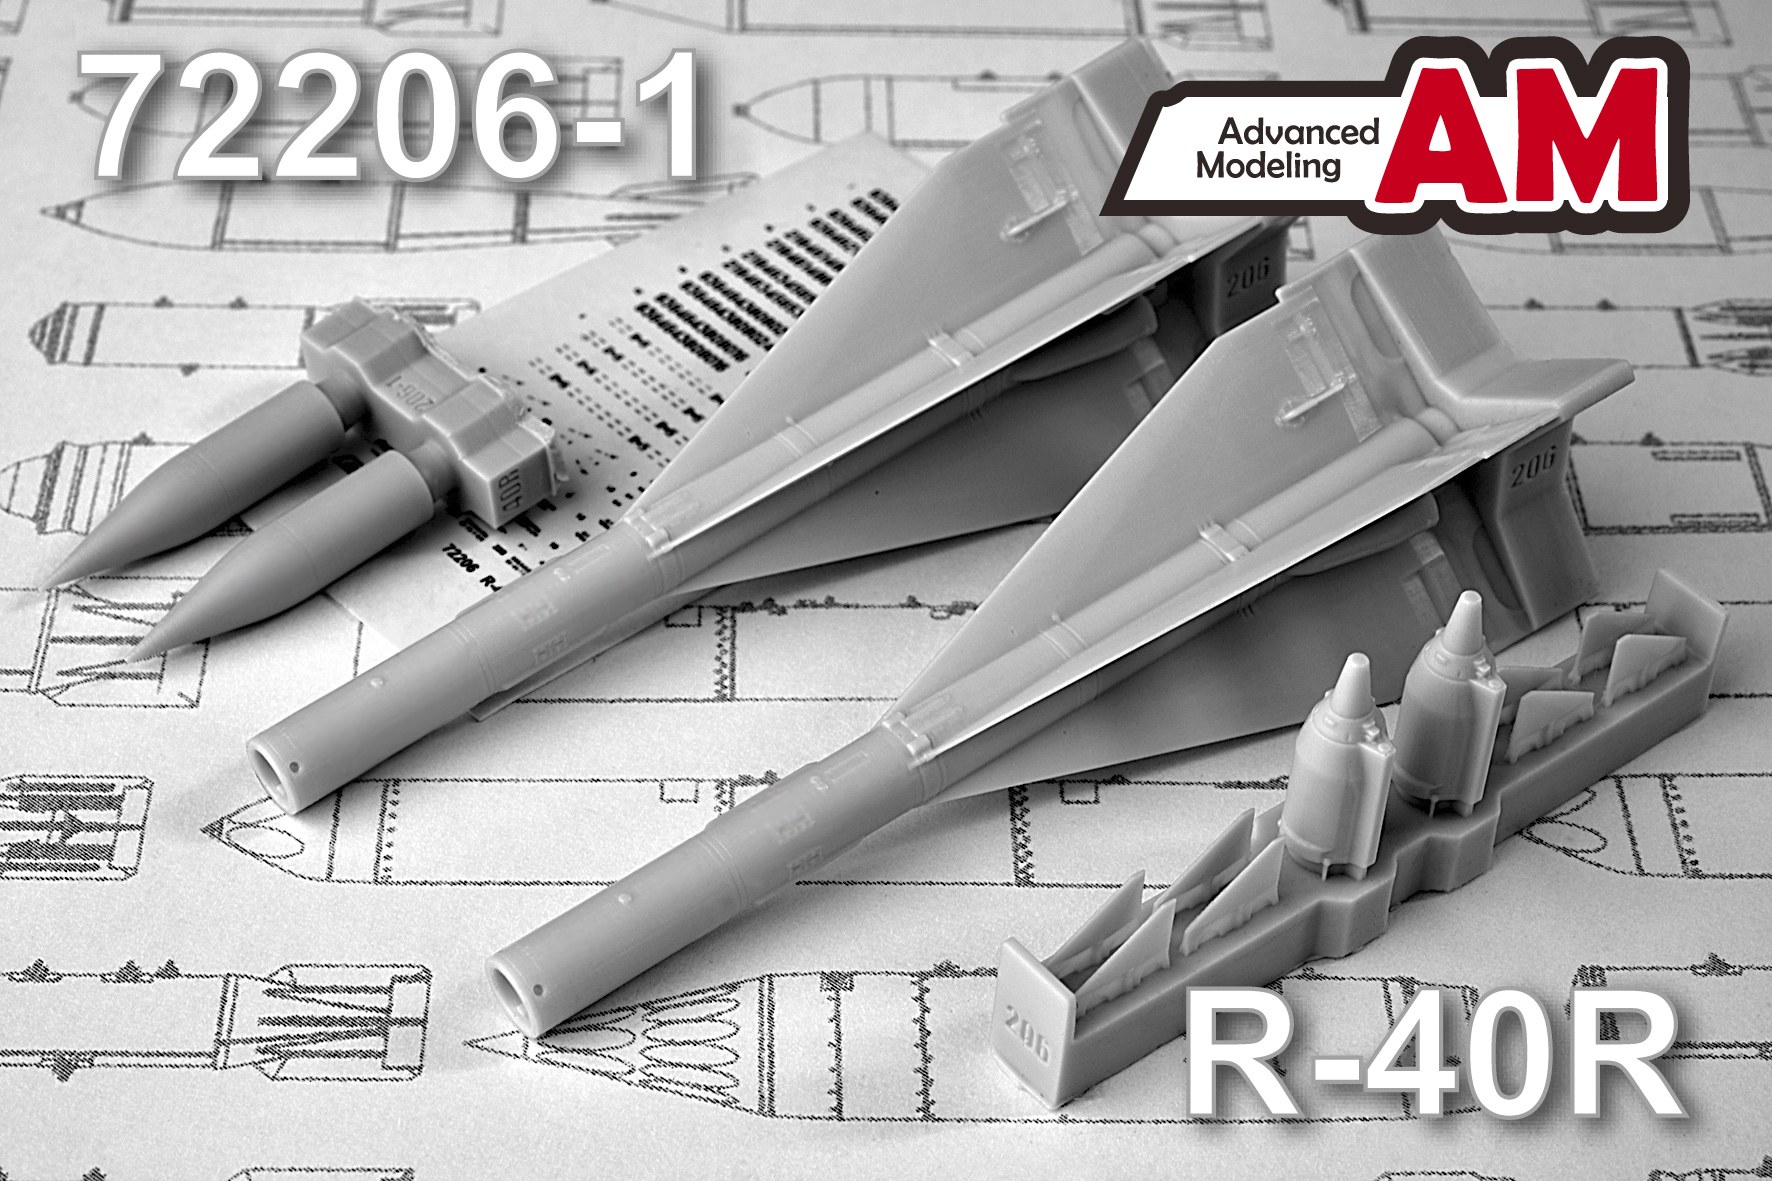 Additions (3D resin printing) 1/72 R-40RD Air to Air missile (Advanced Modeling) 